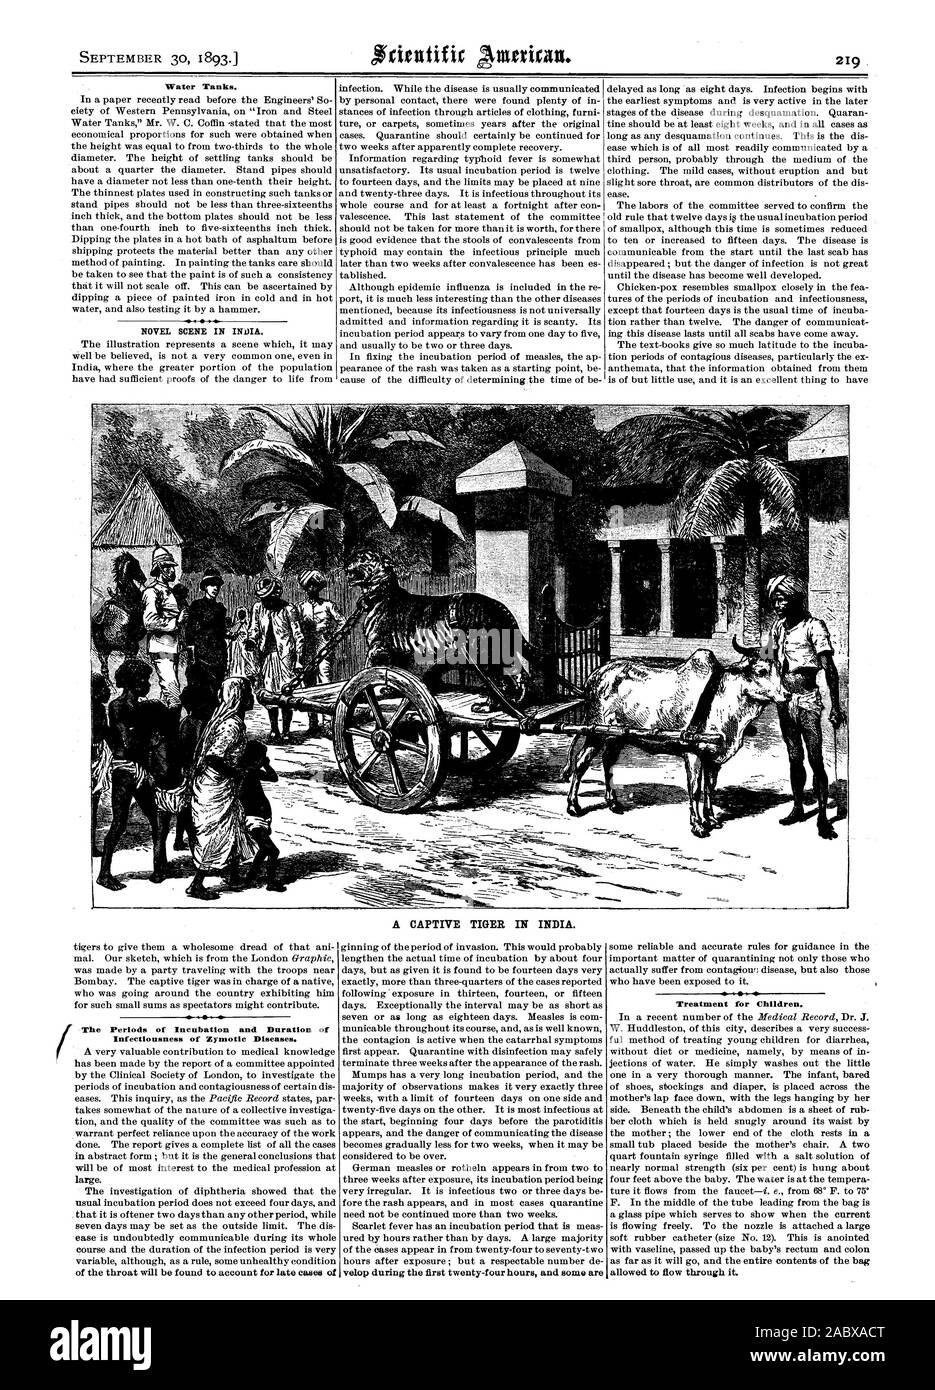 Water Tanks. NOVEL SCENE IN INDIA. A CAPTIVE TIGER IN INDIA. 4  Treatment for Children. allowed to flow through it. The Periods of Incubation and Duration of Infectiousness of Zymotic Diseases., scientific american, 1893-09-30 Stock Photo